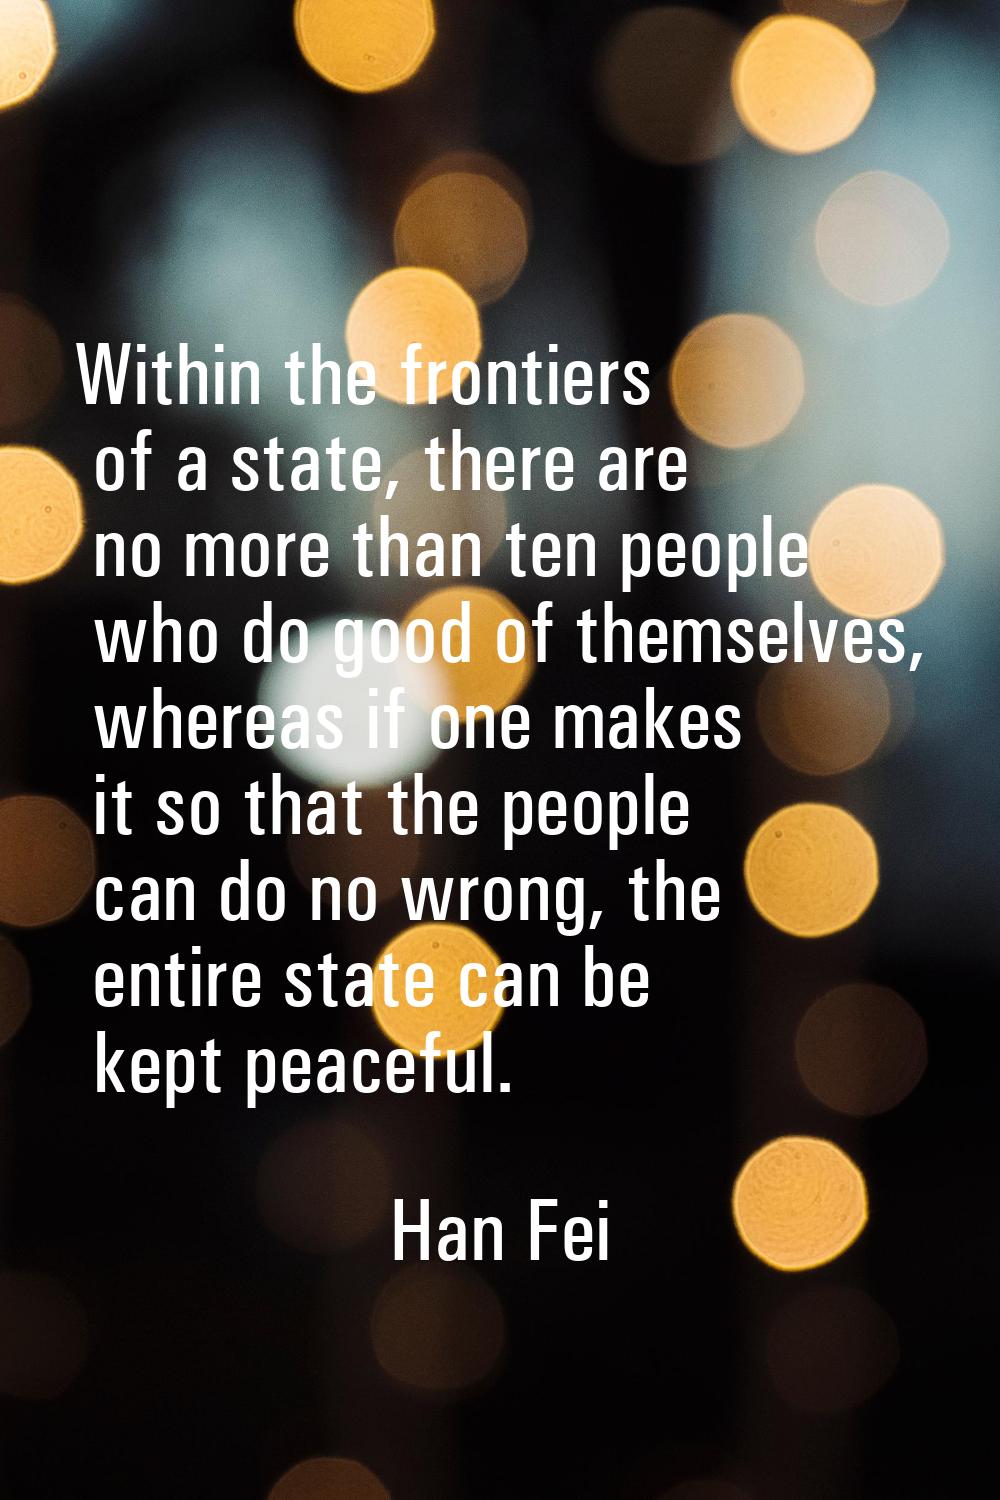 Within the frontiers of a state, there are no more than ten people who do good of themselves, where